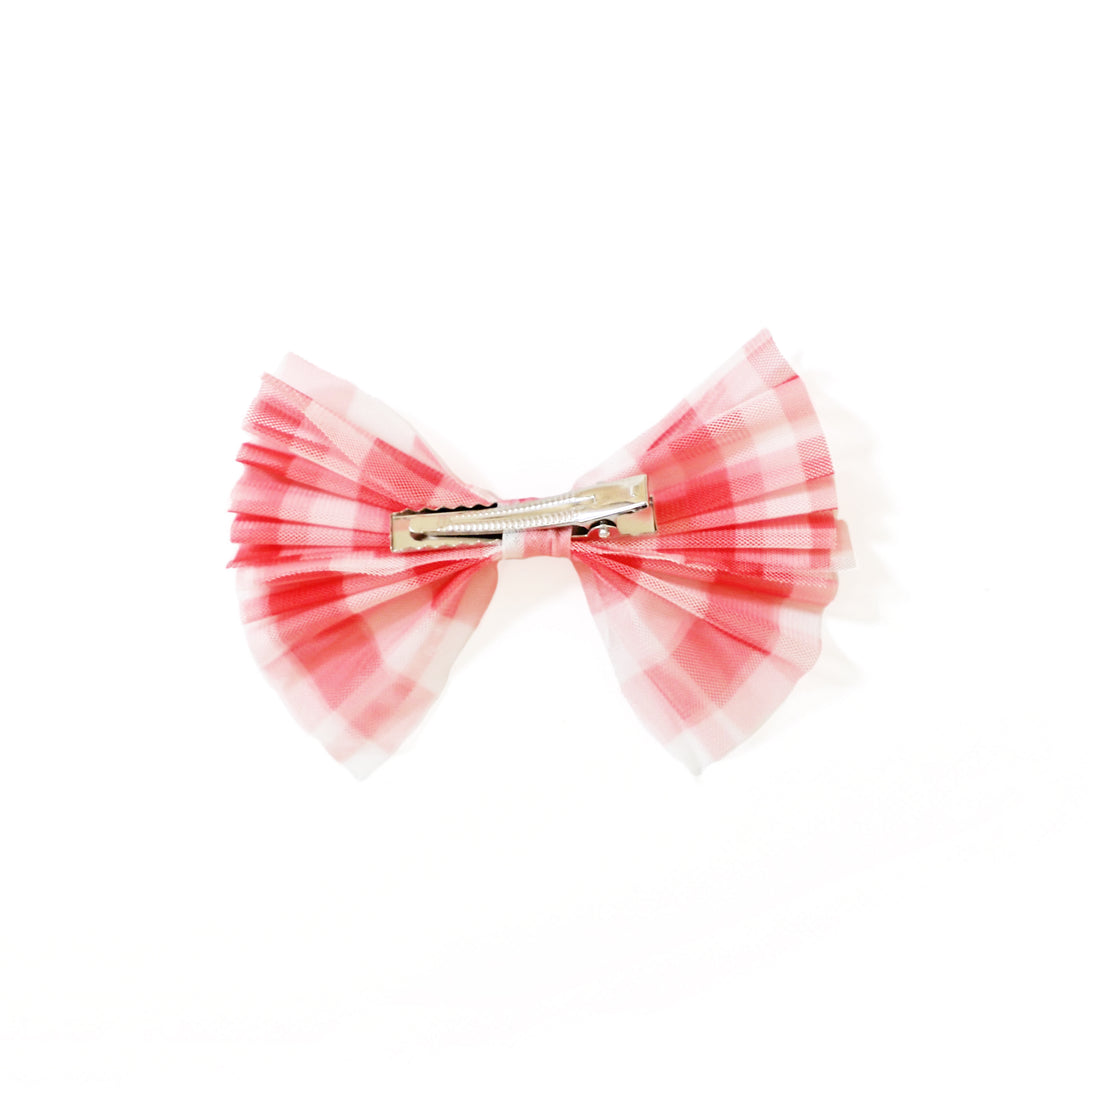 Tulle Hair Clip -  RED GINGHAM